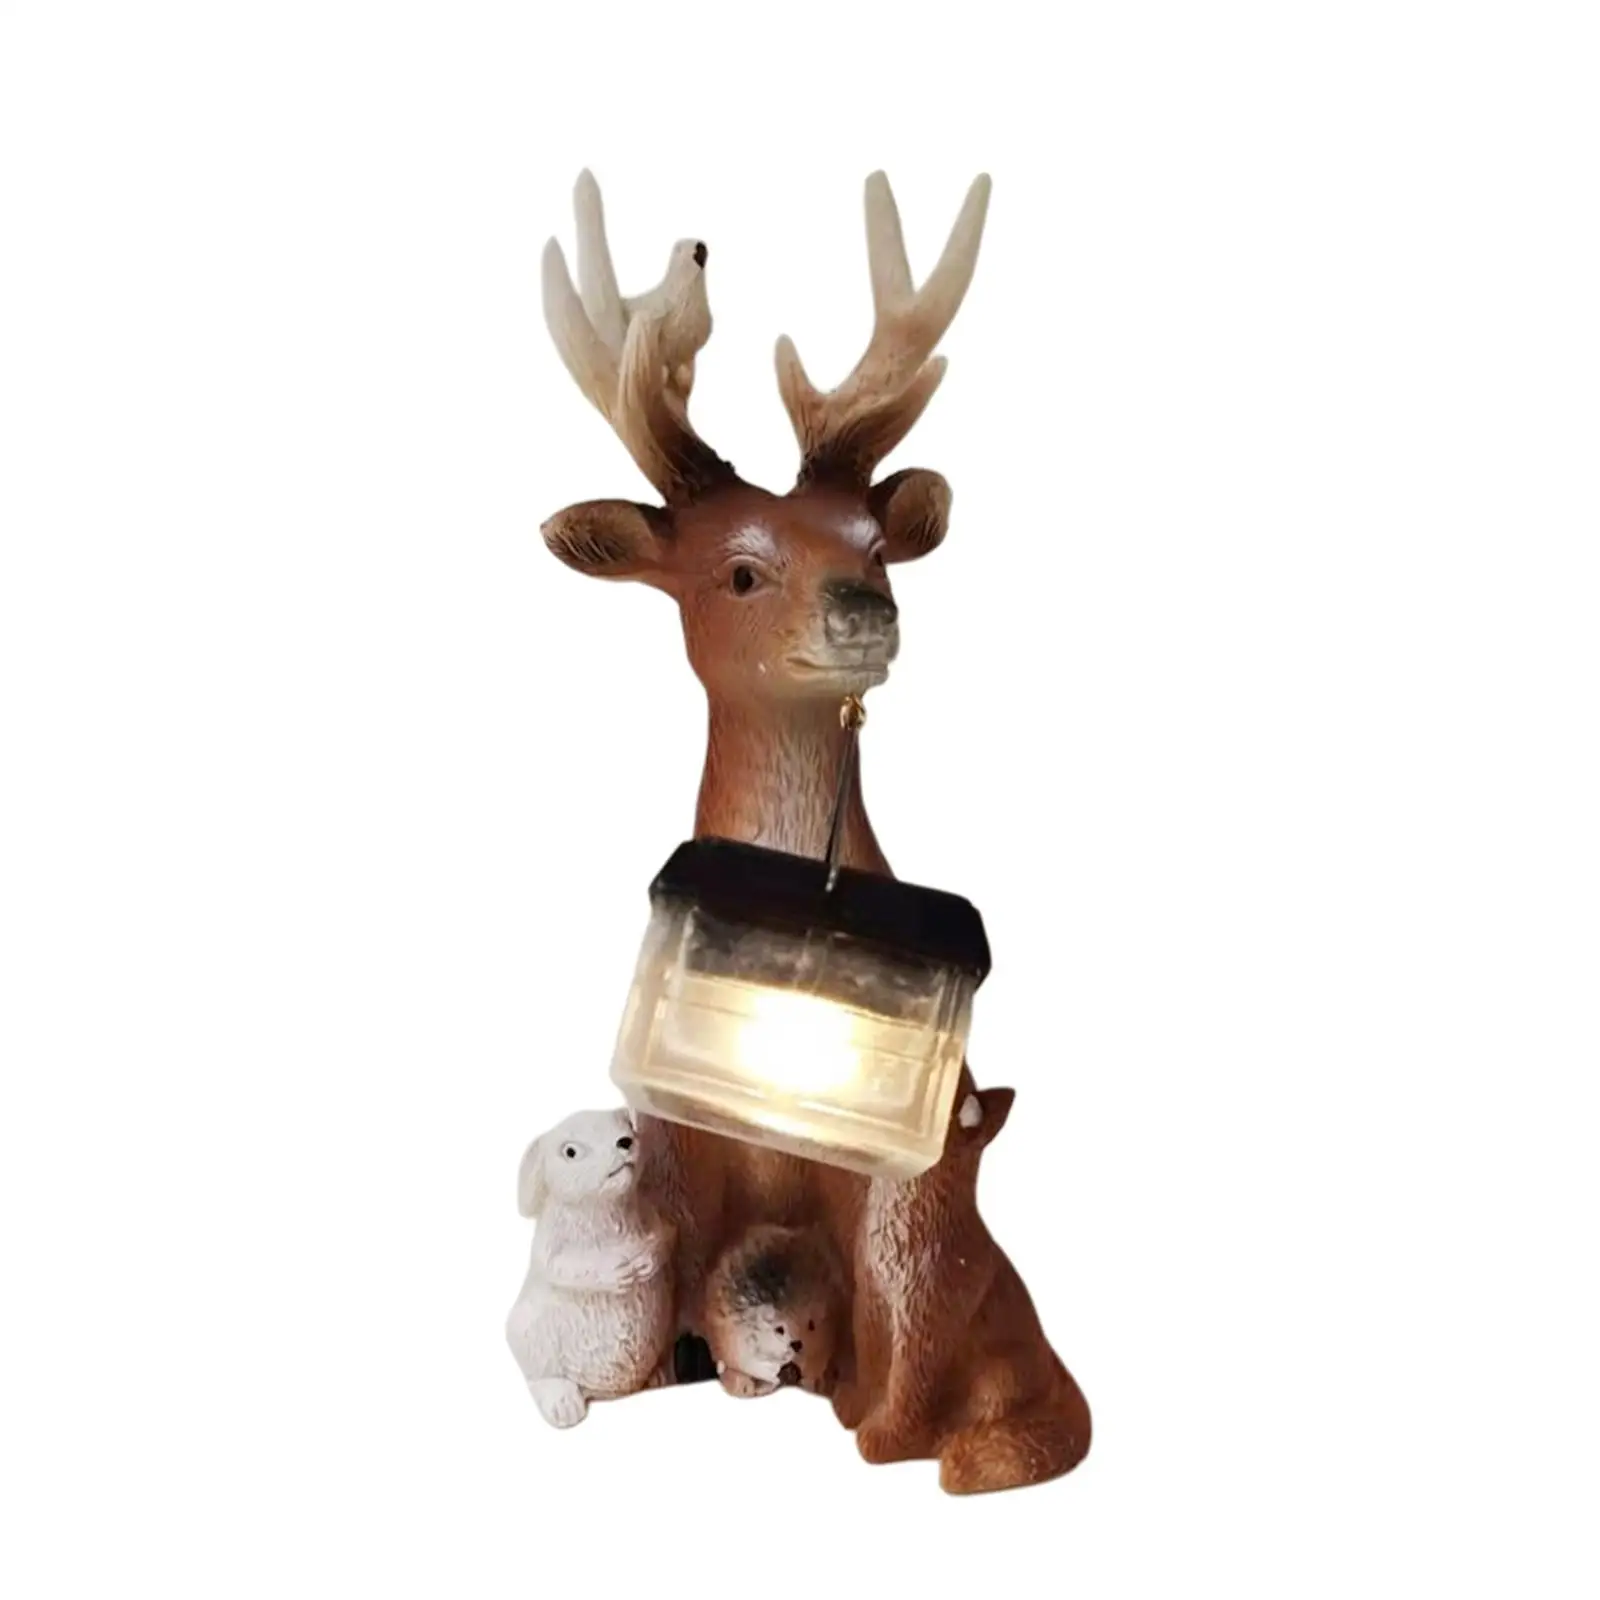 Garden deer Statue Lawn Decorations Resin with Solar Light for Porch Yard Patio Gifts